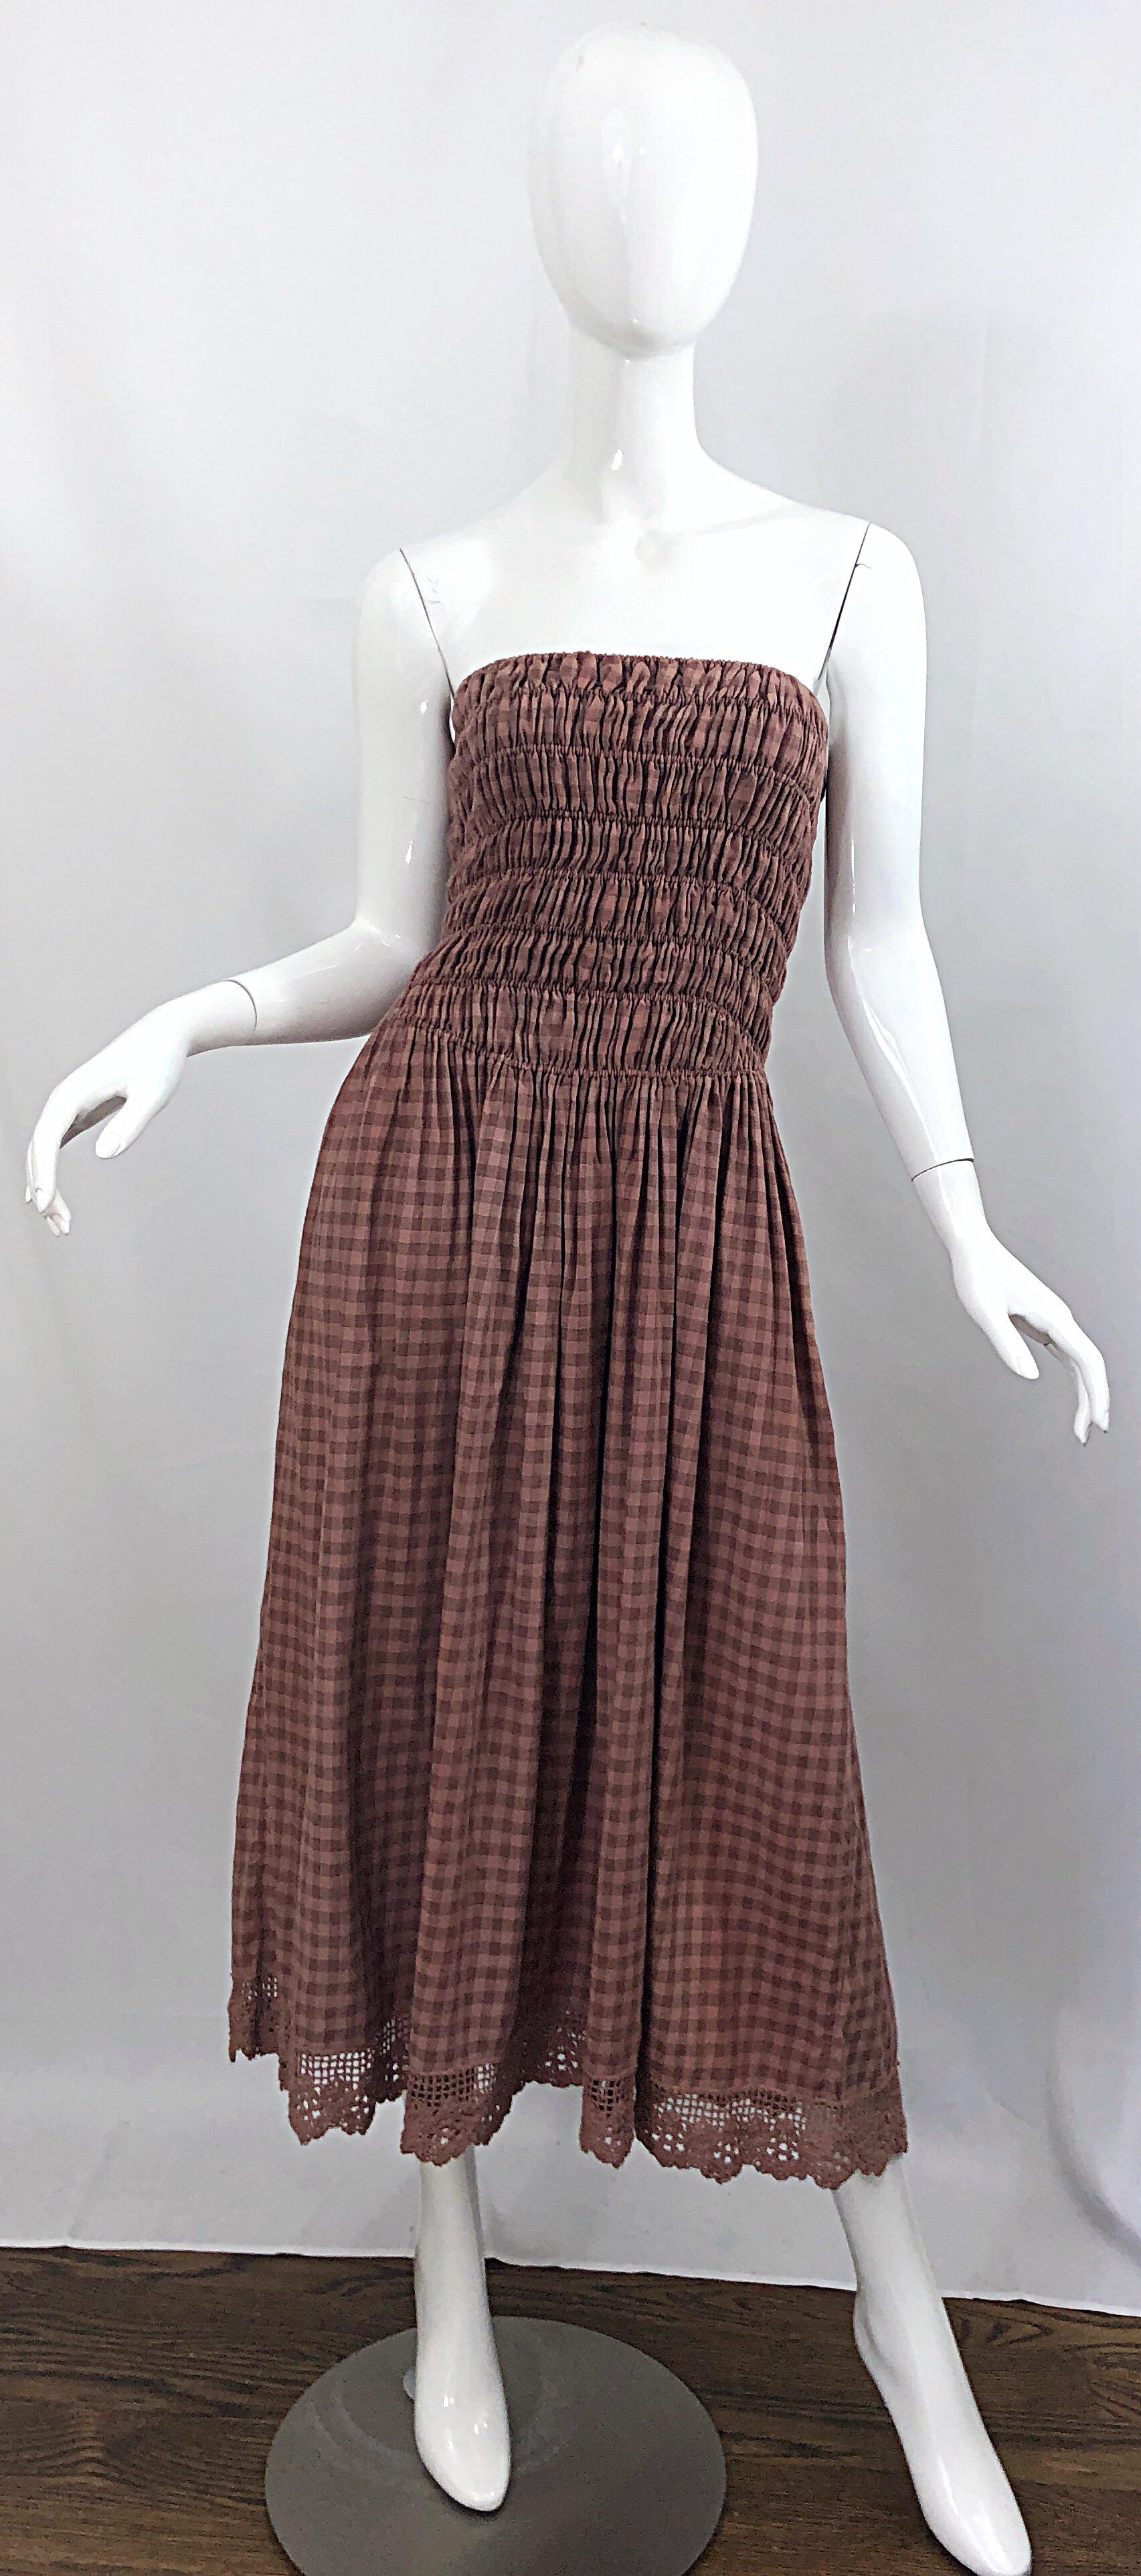 Chic vintage 70s GEOFFREY BEENE ' Beene Bag ' (his rare more risk taking label) checkered gingham dusty rose pink and brown crochet strapless midi dress! Features a stretch cinched bodice that flatters any shape or size. Dusty rose pink and brown,